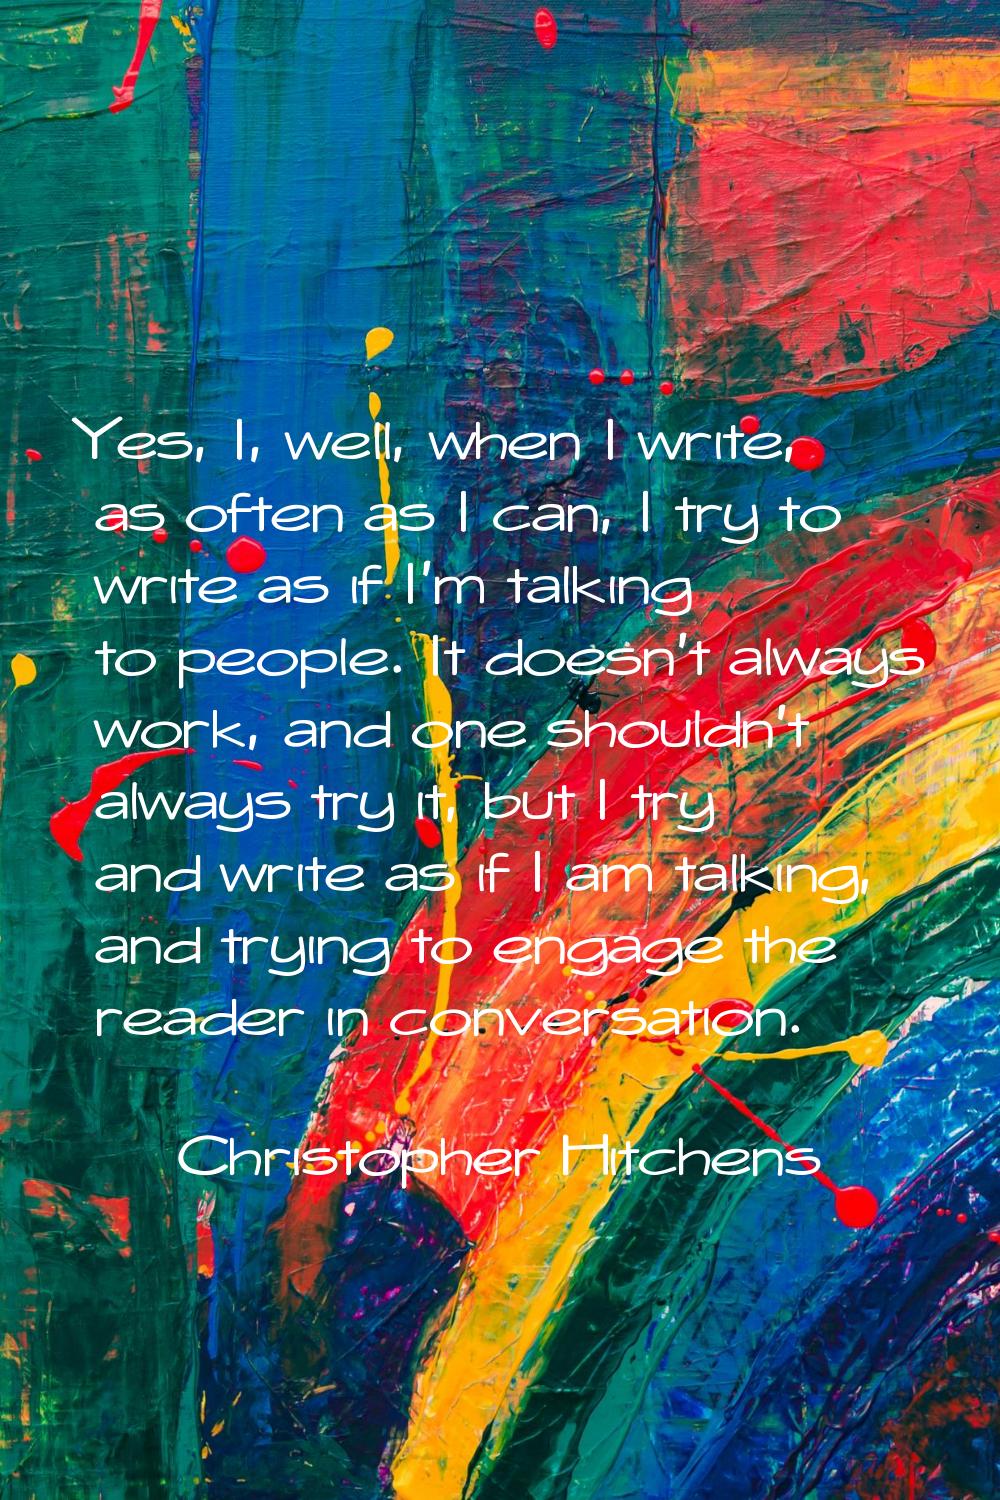 Yes, I, well, when I write, as often as I can, I try to write as if I'm talking to people. It doesn